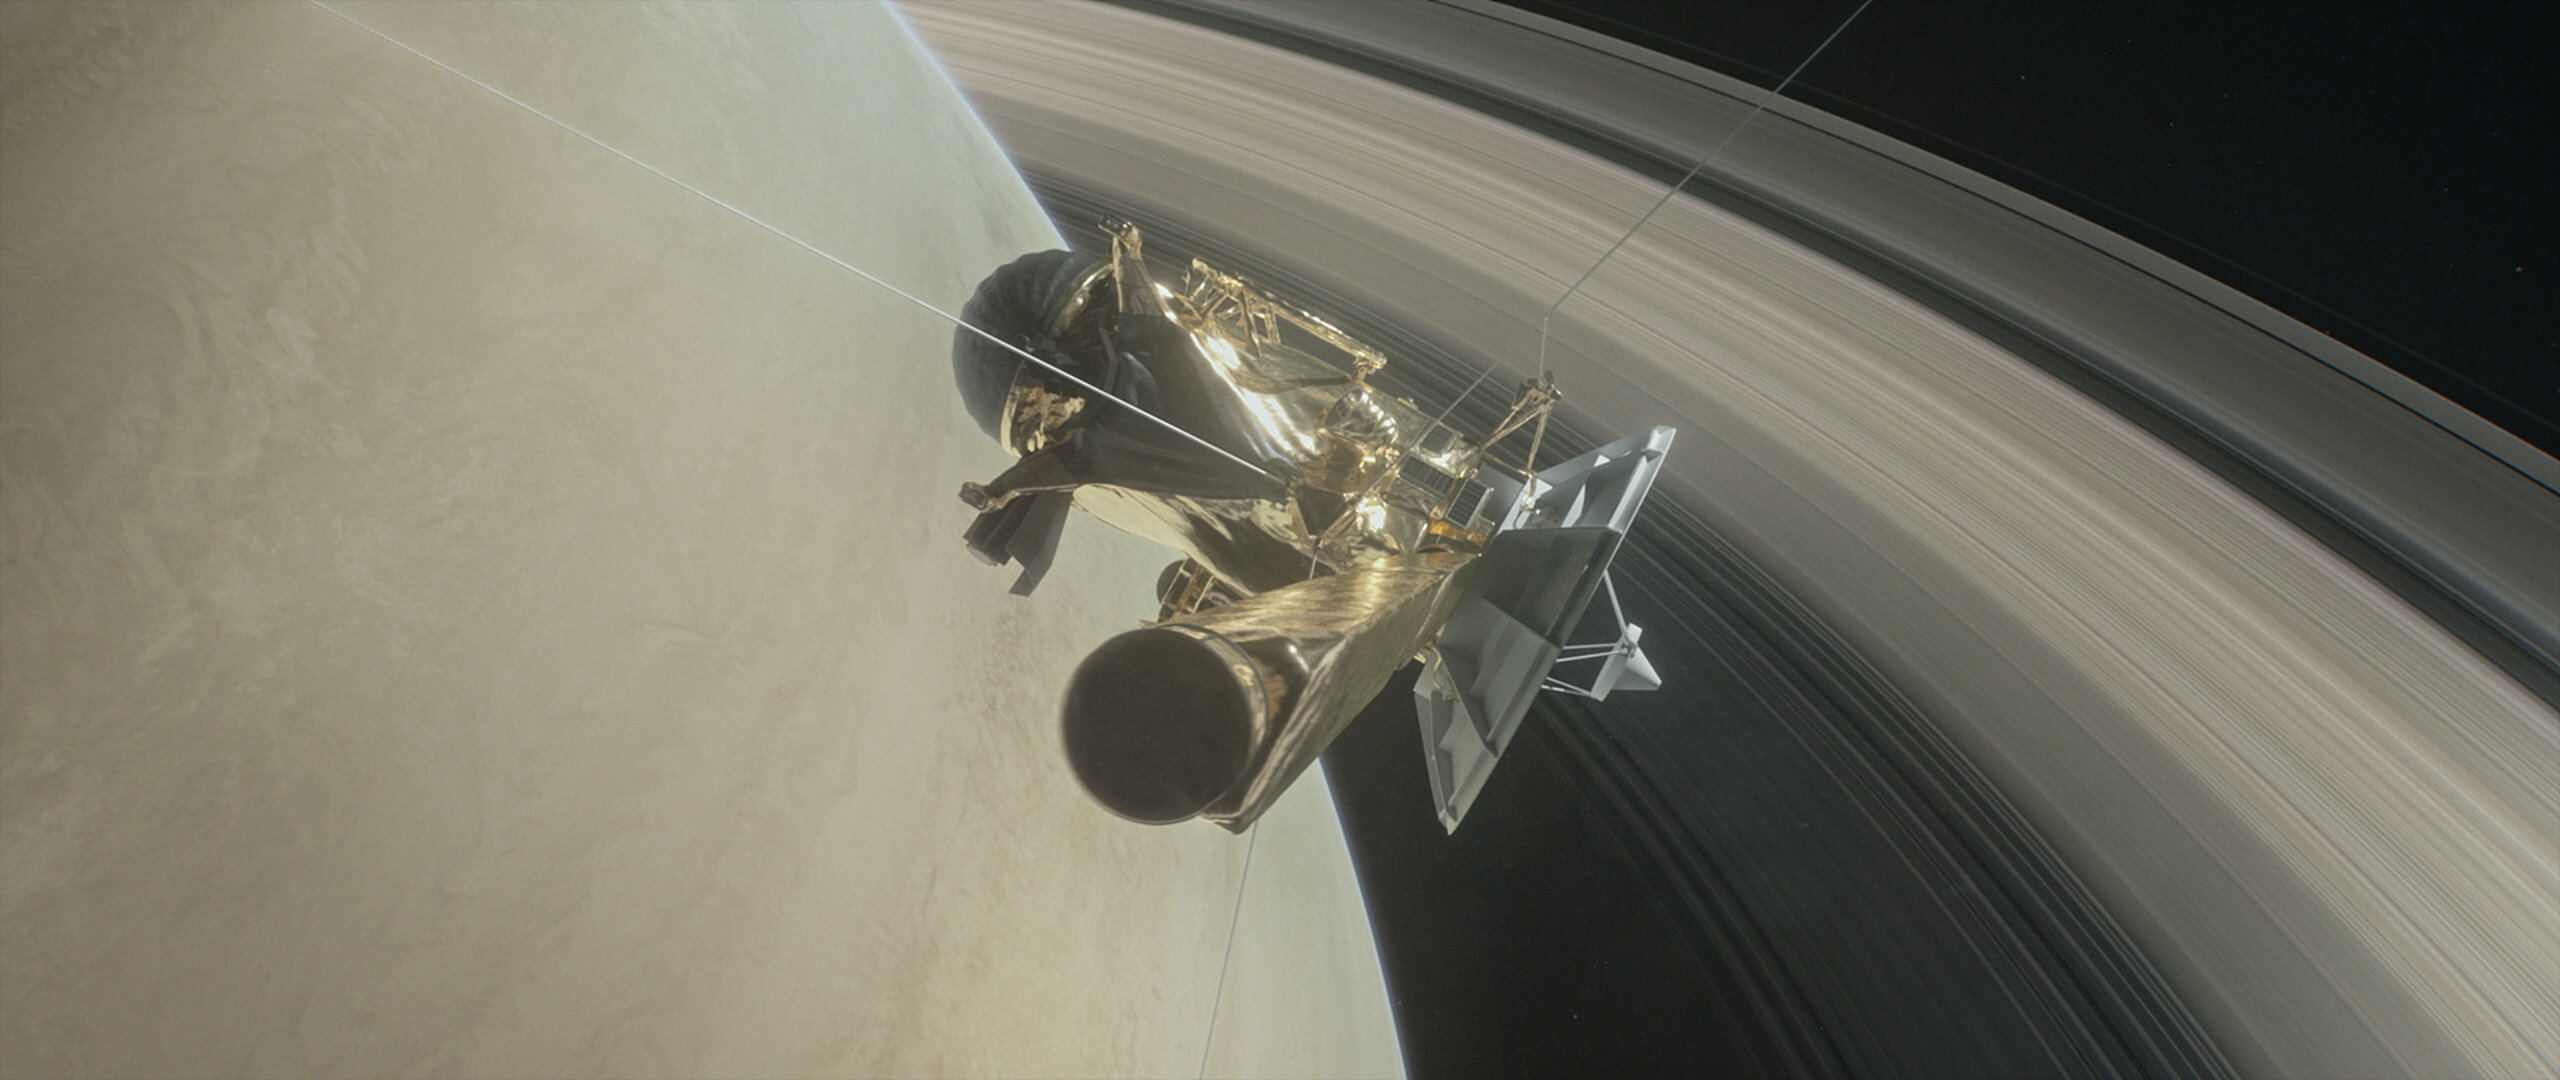 The Cassini probe would have looked like this as it got closer to Saturn